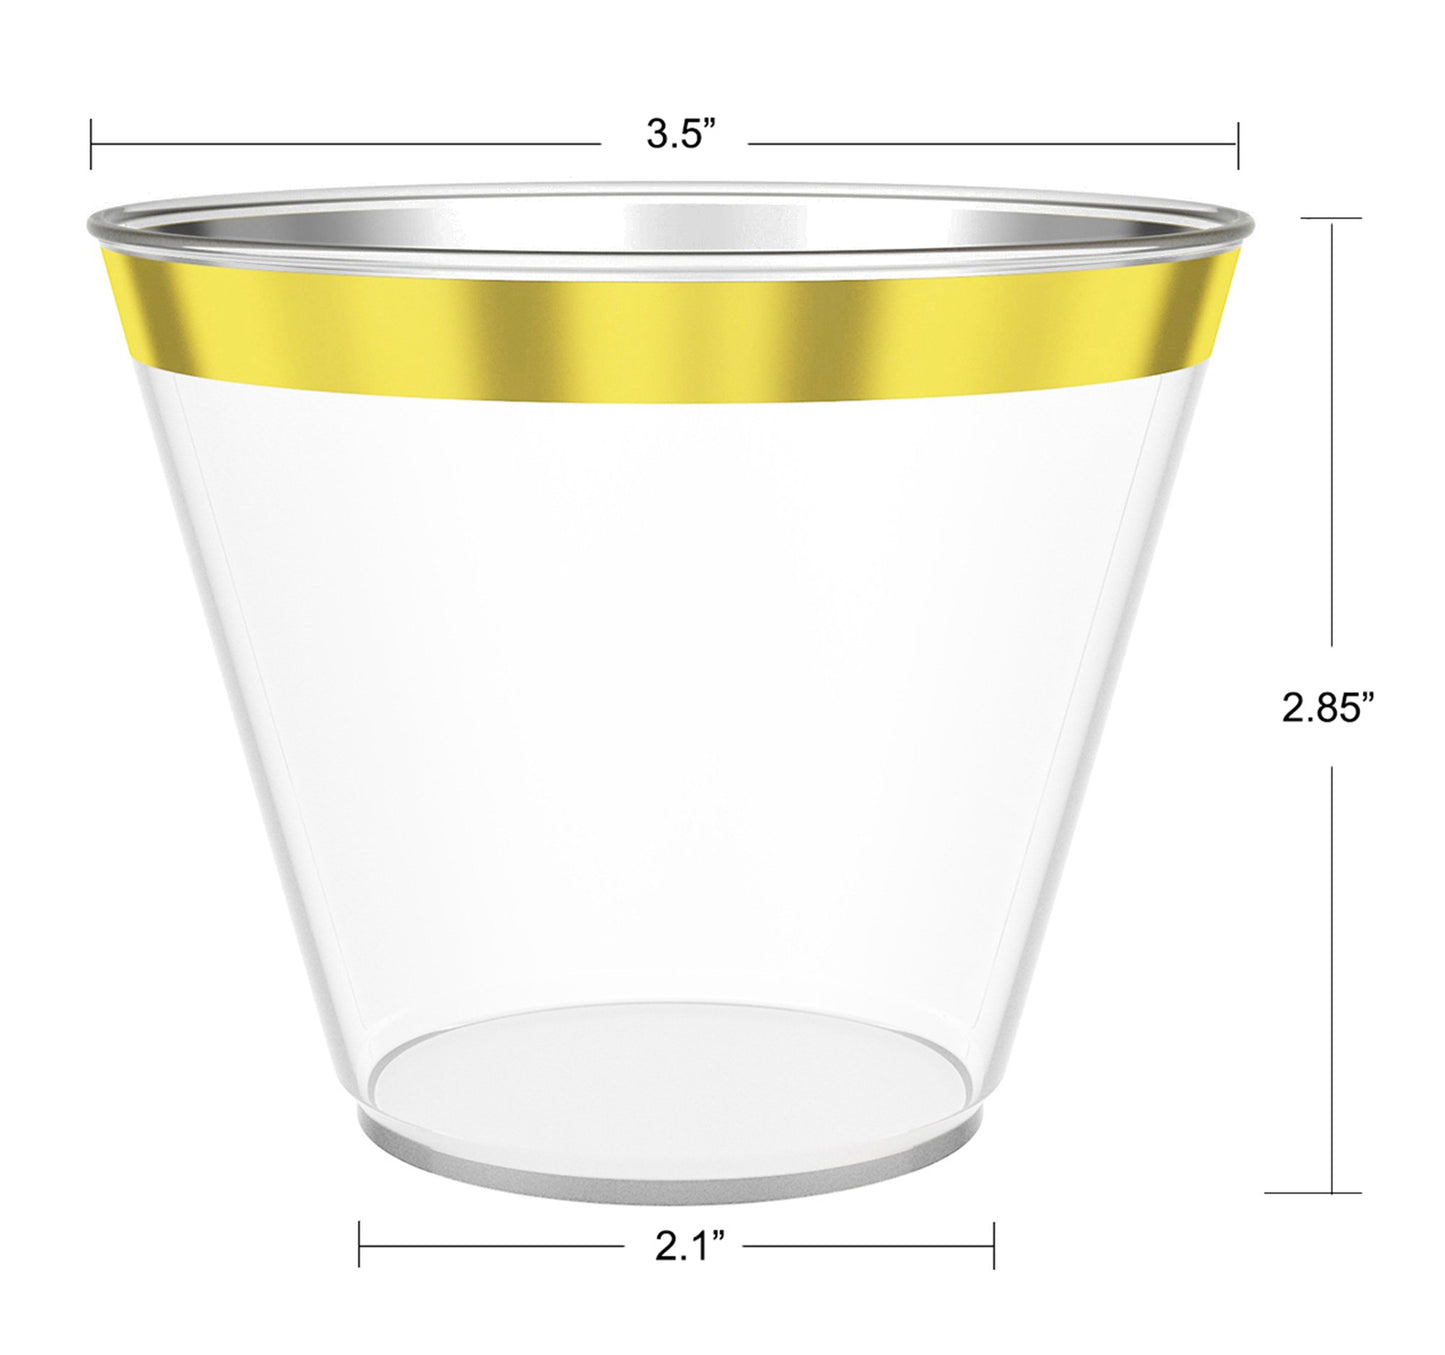 JL Prime 100 Gold Plastic Cups, 9 Oz Heavy Duty Reusable Disposable Gold Rim Clear Plastic Cups, Old Fashioned Tumblers, Hard Plastic Drinking Cups for Party and Wedding